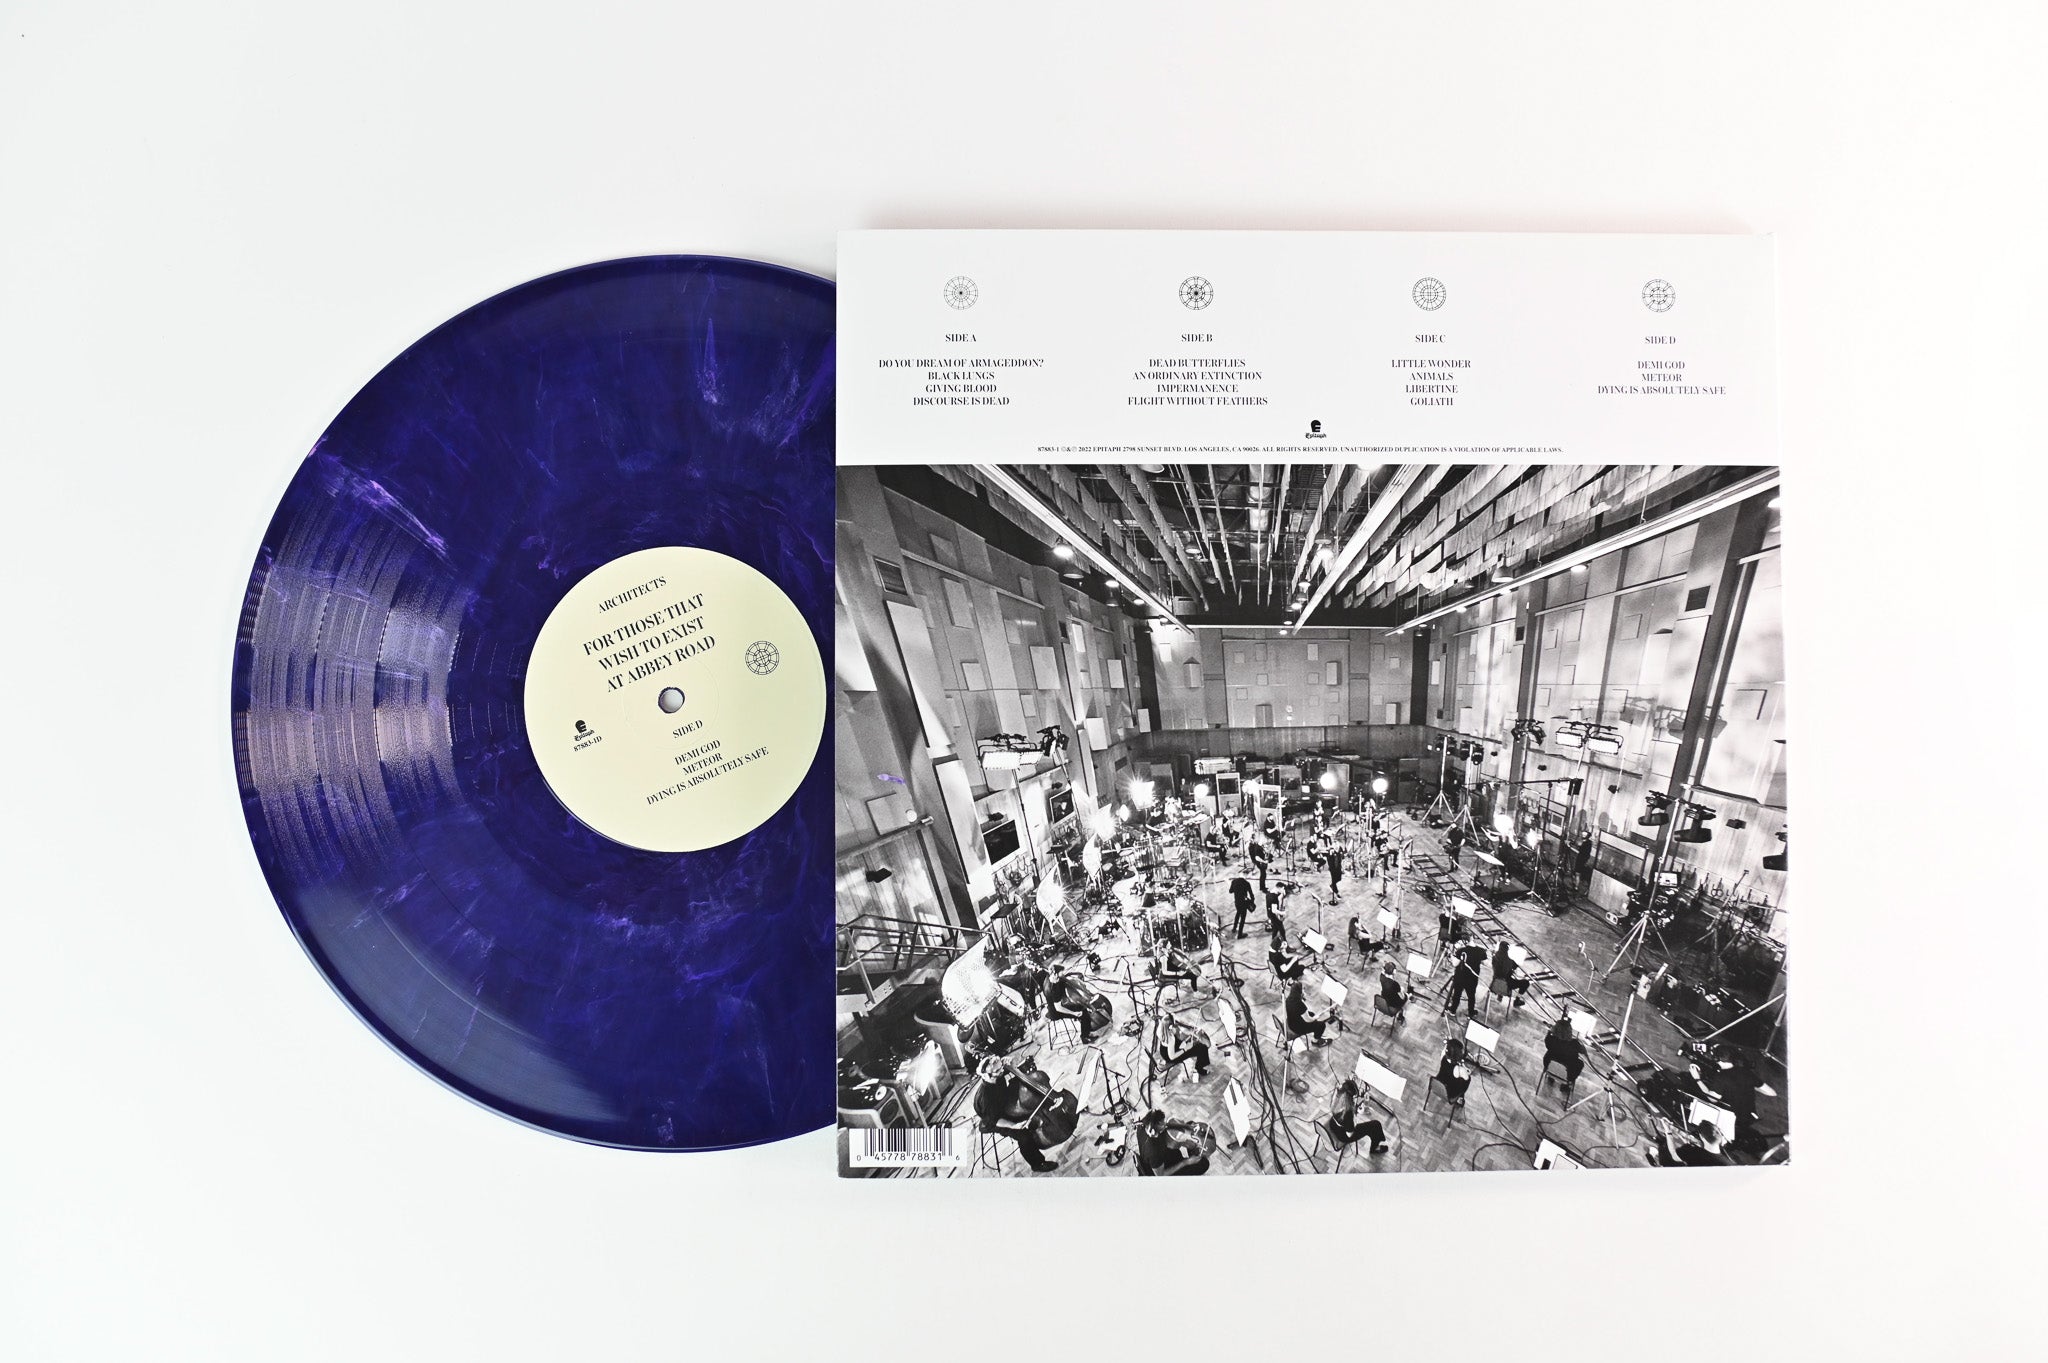 Architects - For Those That Wish To Exist At Abbey Road on Epitaph Ltd Purple Pink Swirl